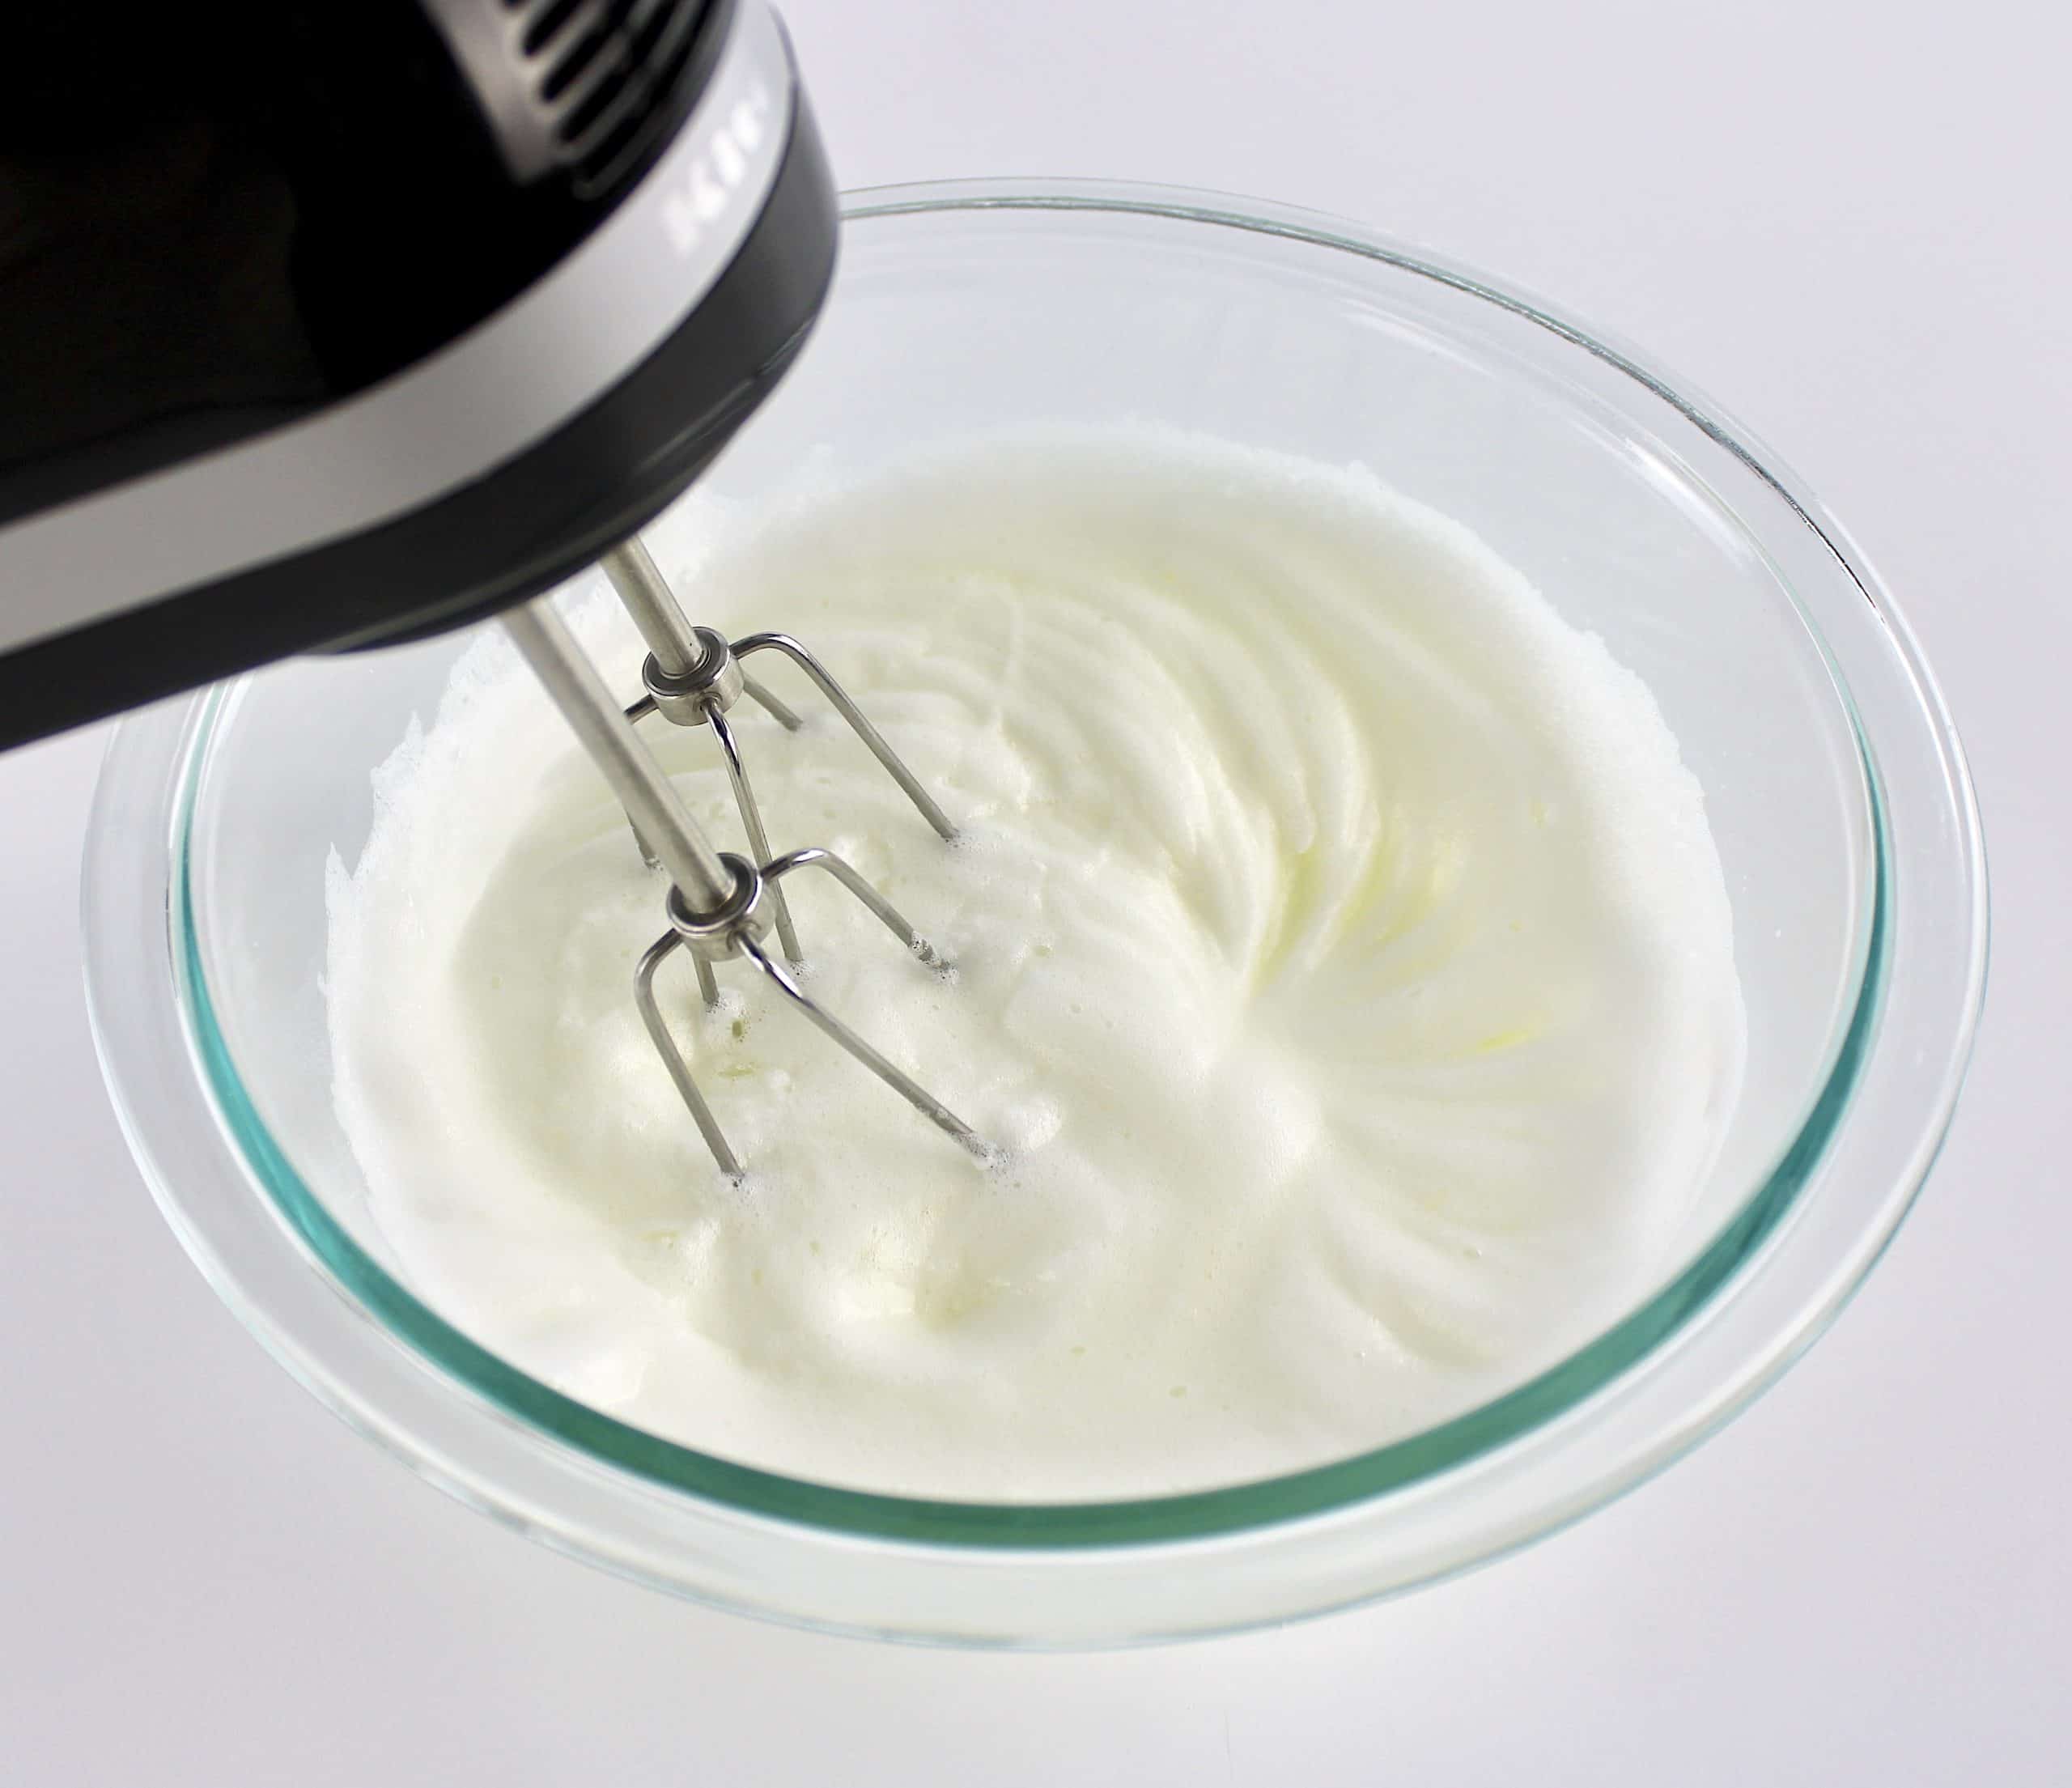 egg whites being whipped with hand mixer in glass bowl